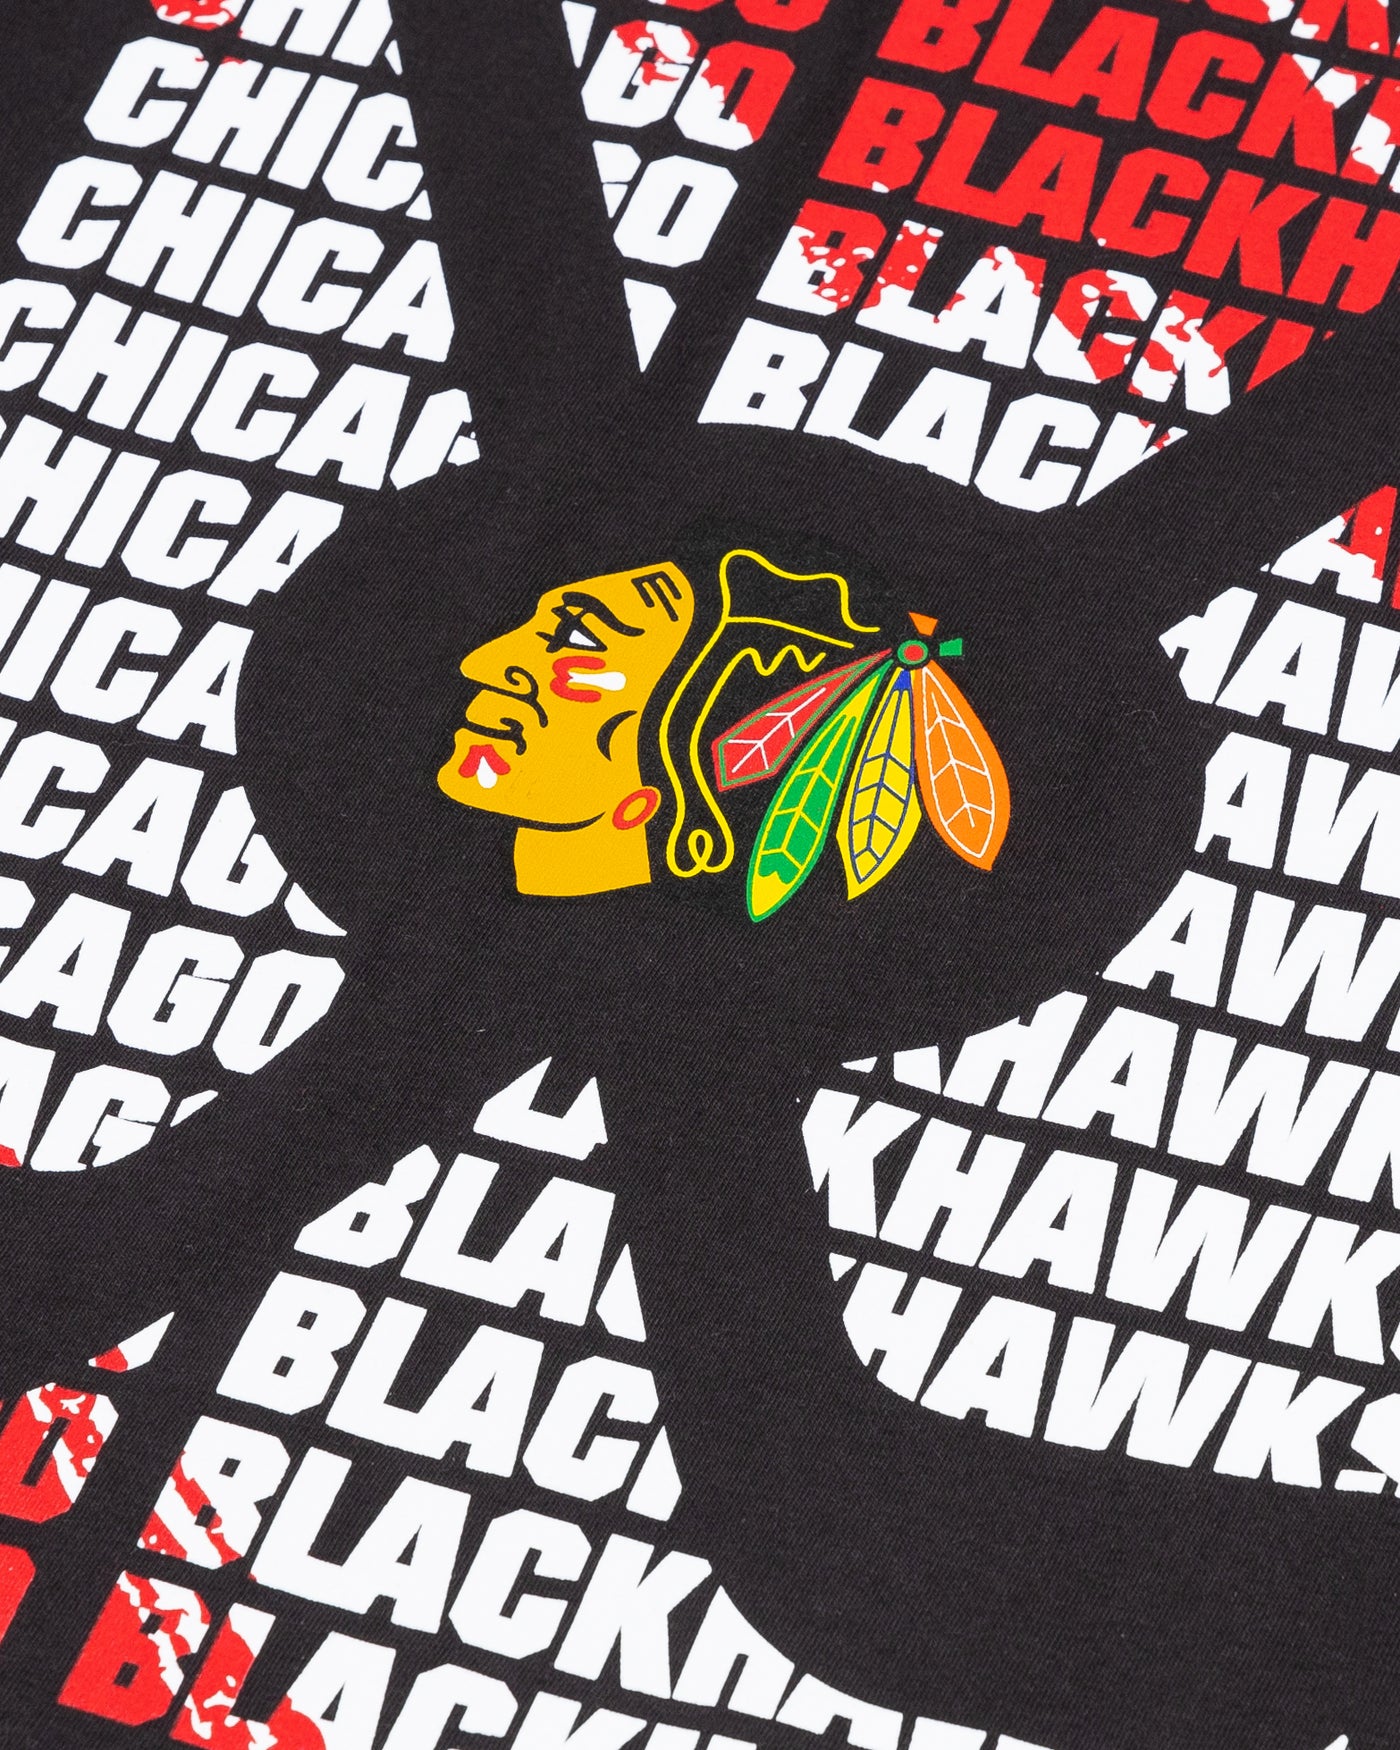 Chicago Blackhawks youth tee with wordmark graphic and primary logo on crossed hockey sticks - detail lay flat